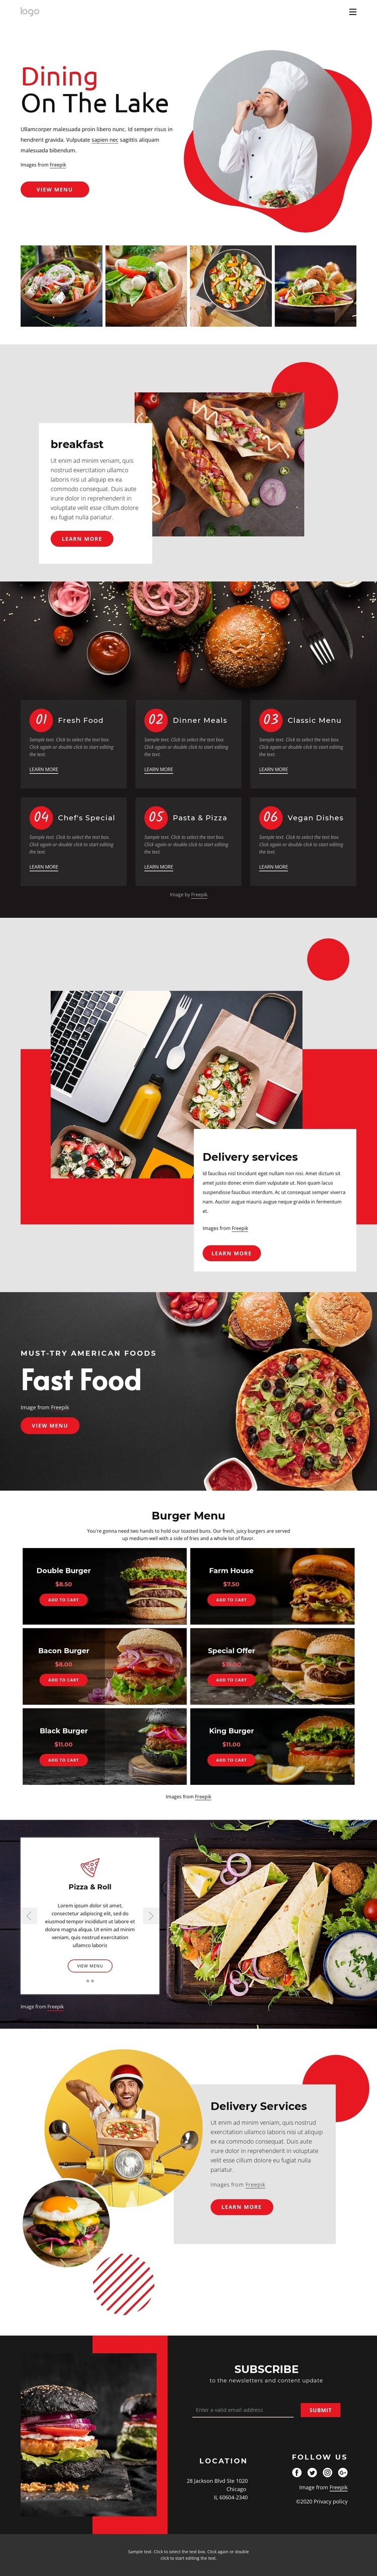 Dining on the lake Web Page Design